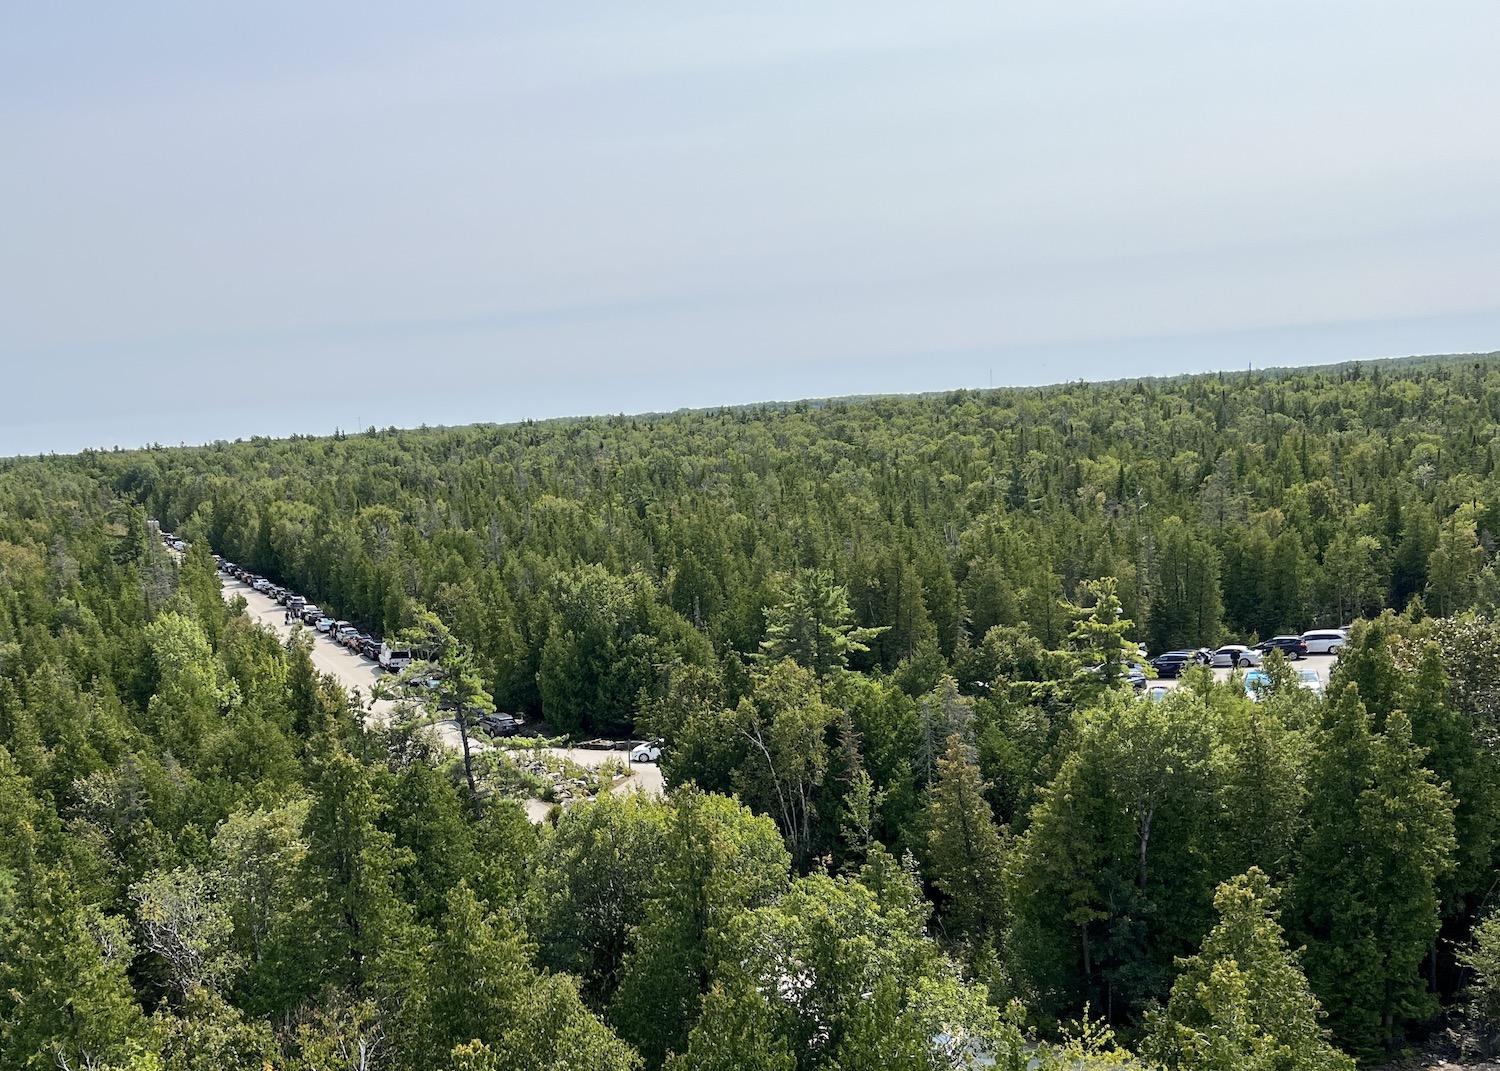 On a summer weekend, the parking lot for Bruce Peninsula National Park and Fathom Five National Marine Park overflows on to the nearby road.